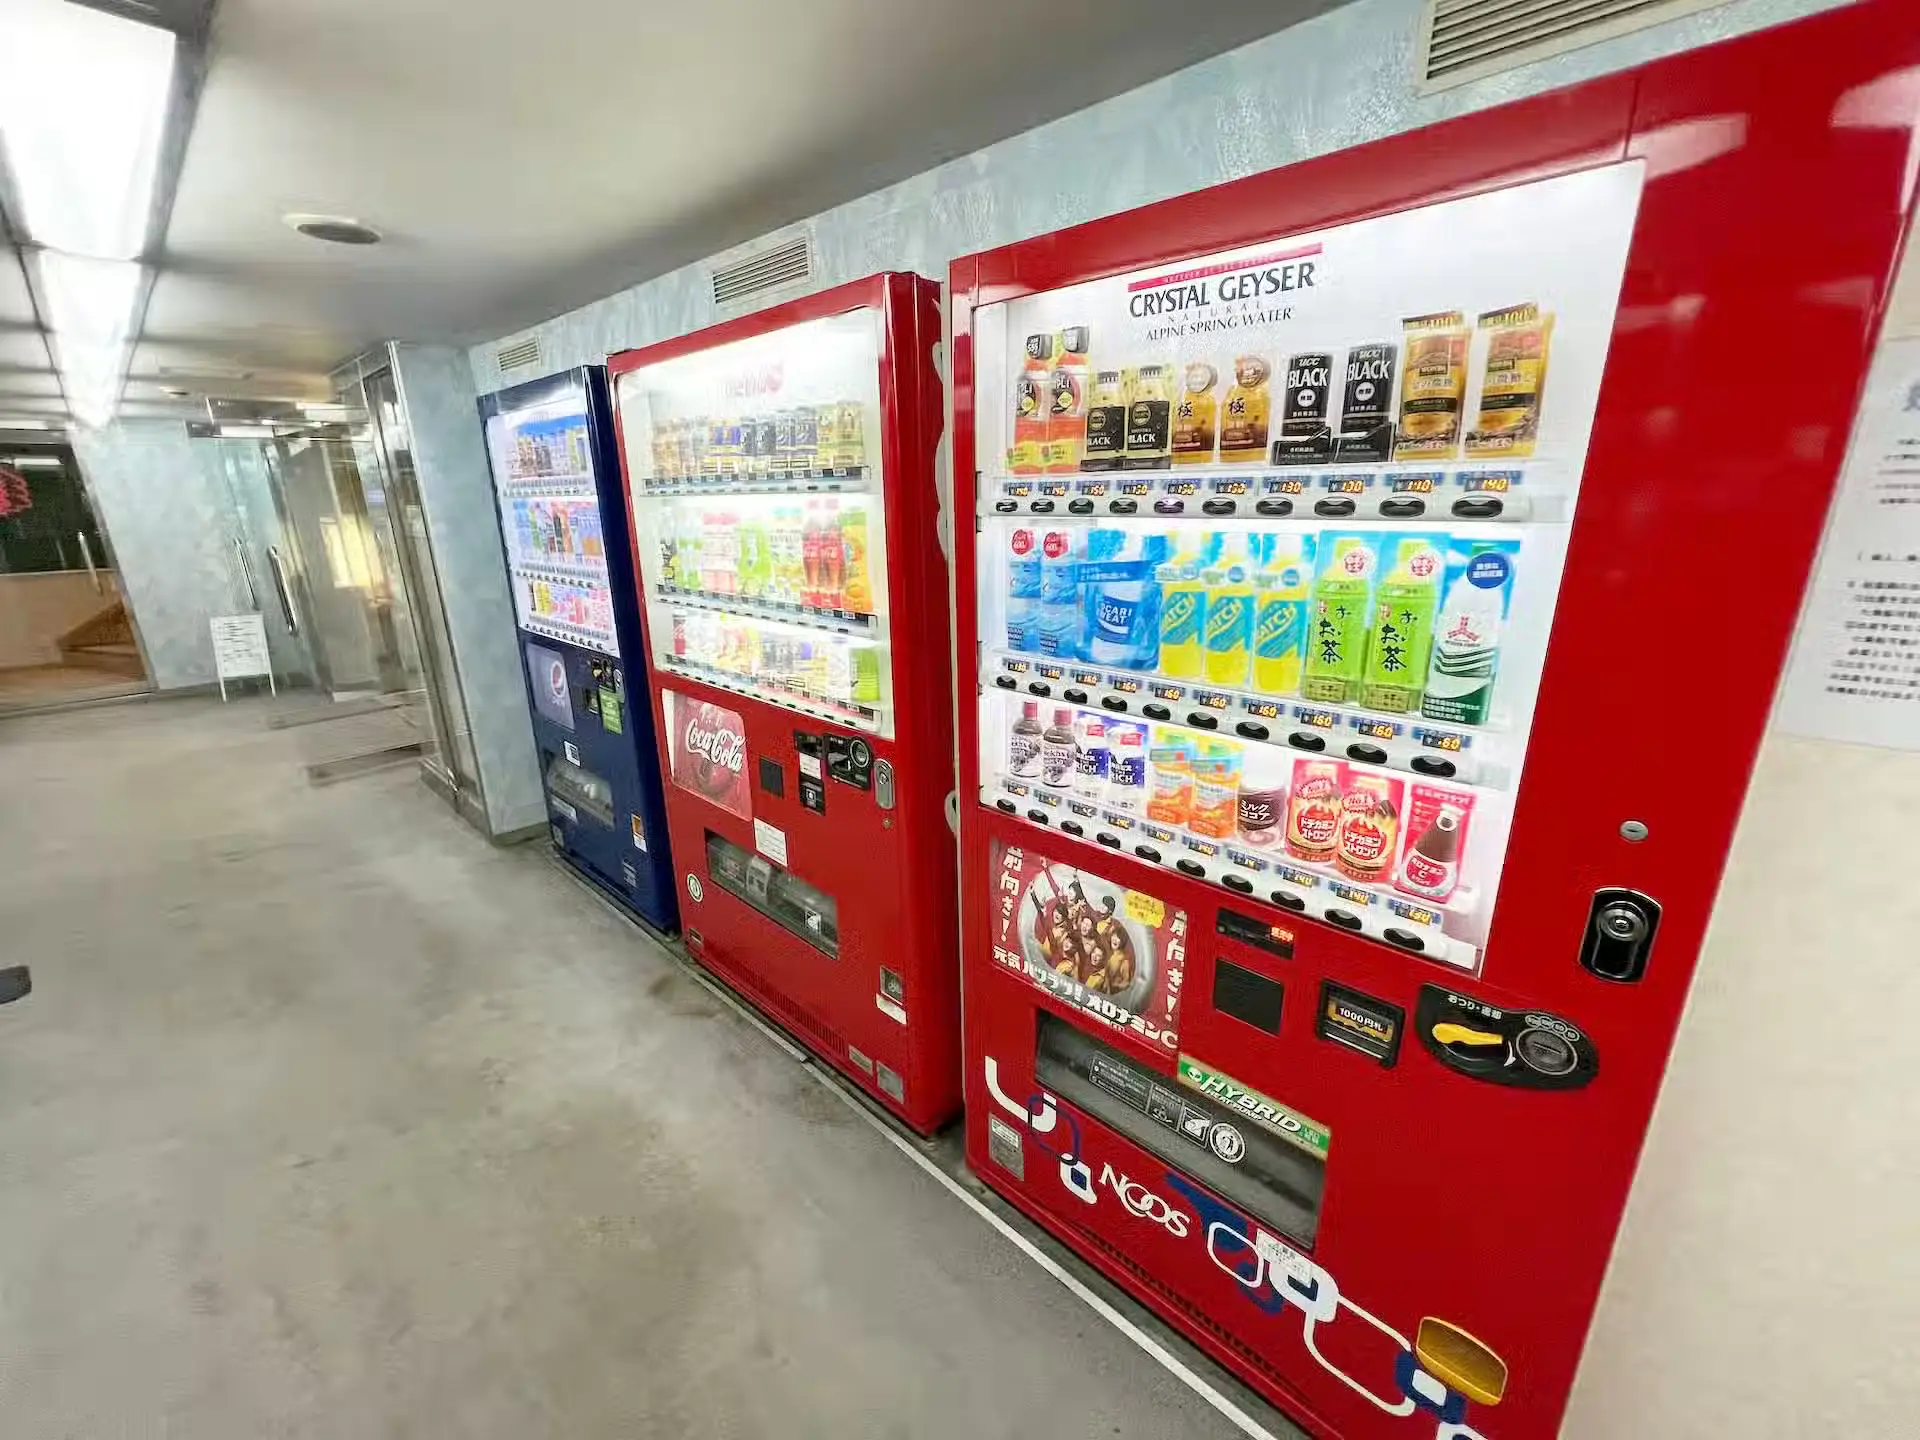 On board the Orita Kisen Ferry Yakushima 2, there are vending machines available.